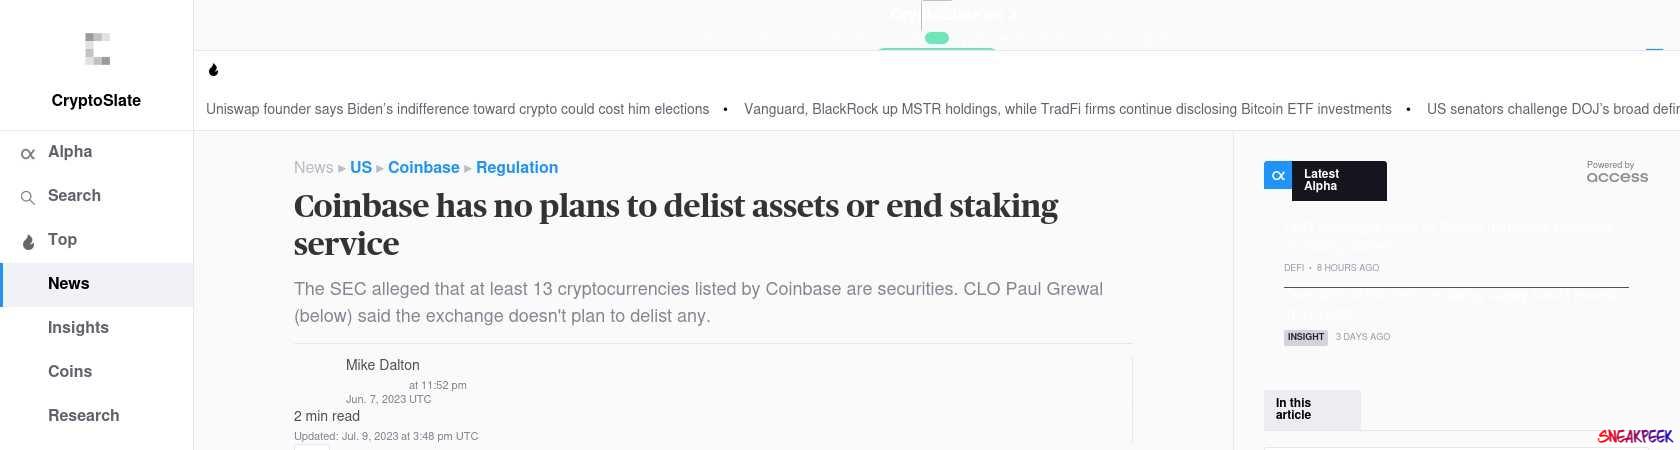 Read the full Article:  ⭲ Coinbase has no plans to delist assets or end staking service